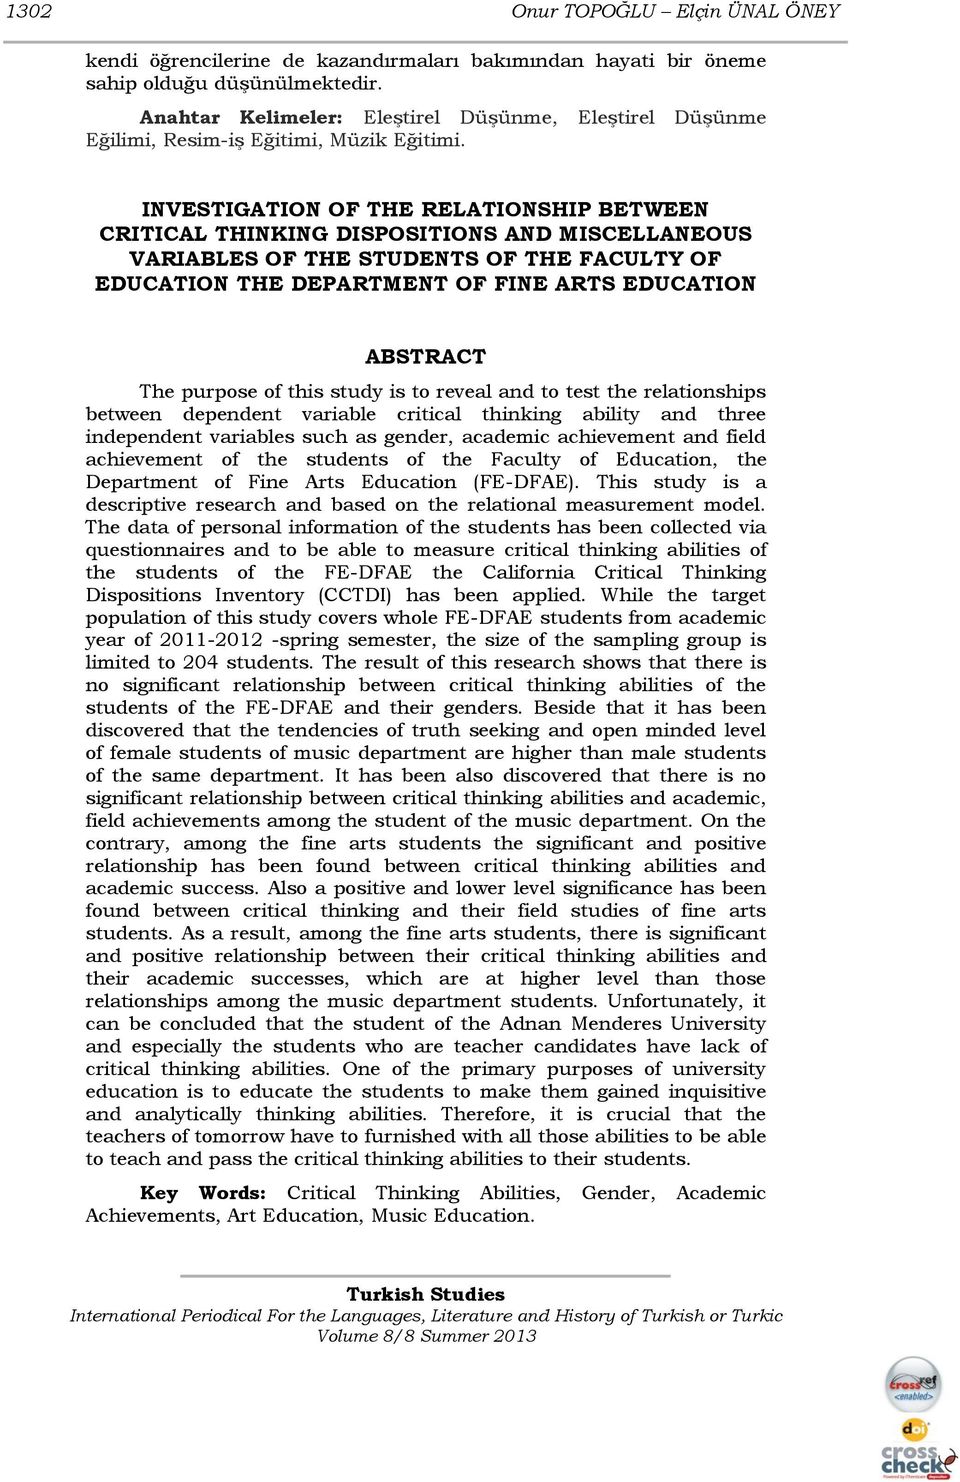 INVESTIGATION OF THE RELATIONSHIP BETWEEN CRITICAL THINKING DISPOSITIONS AND MISCELLANEOUS VARIABLES OF THE STUDENTS OF THE FACULTY OF EDUCATION THE DEPARTMENT OF FINE ARTS EDUCATION ABSTRACT The